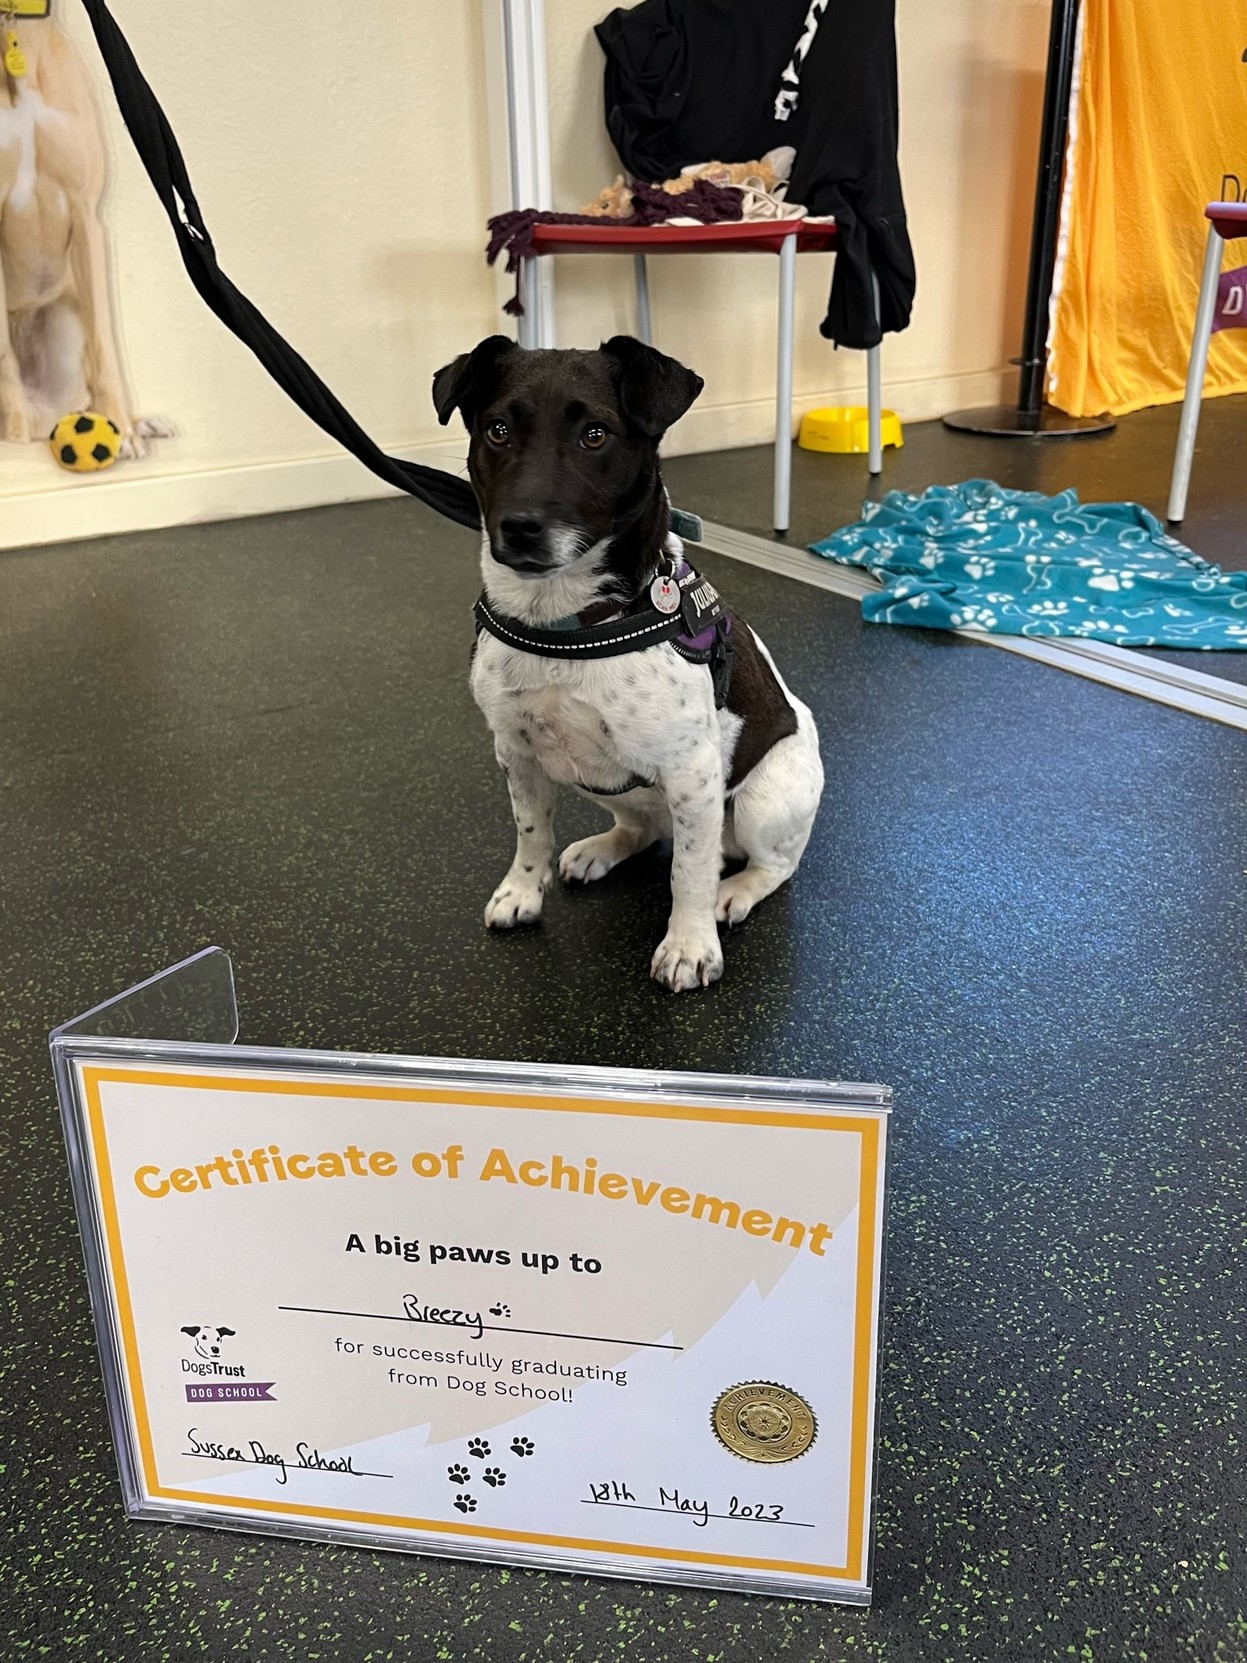 A small back and white terrier sits in front of her graduation certificate. It reads: Certificate of AchievementA big paws up toBreezyfor successfully graduatingfrom Dog School!May 2023